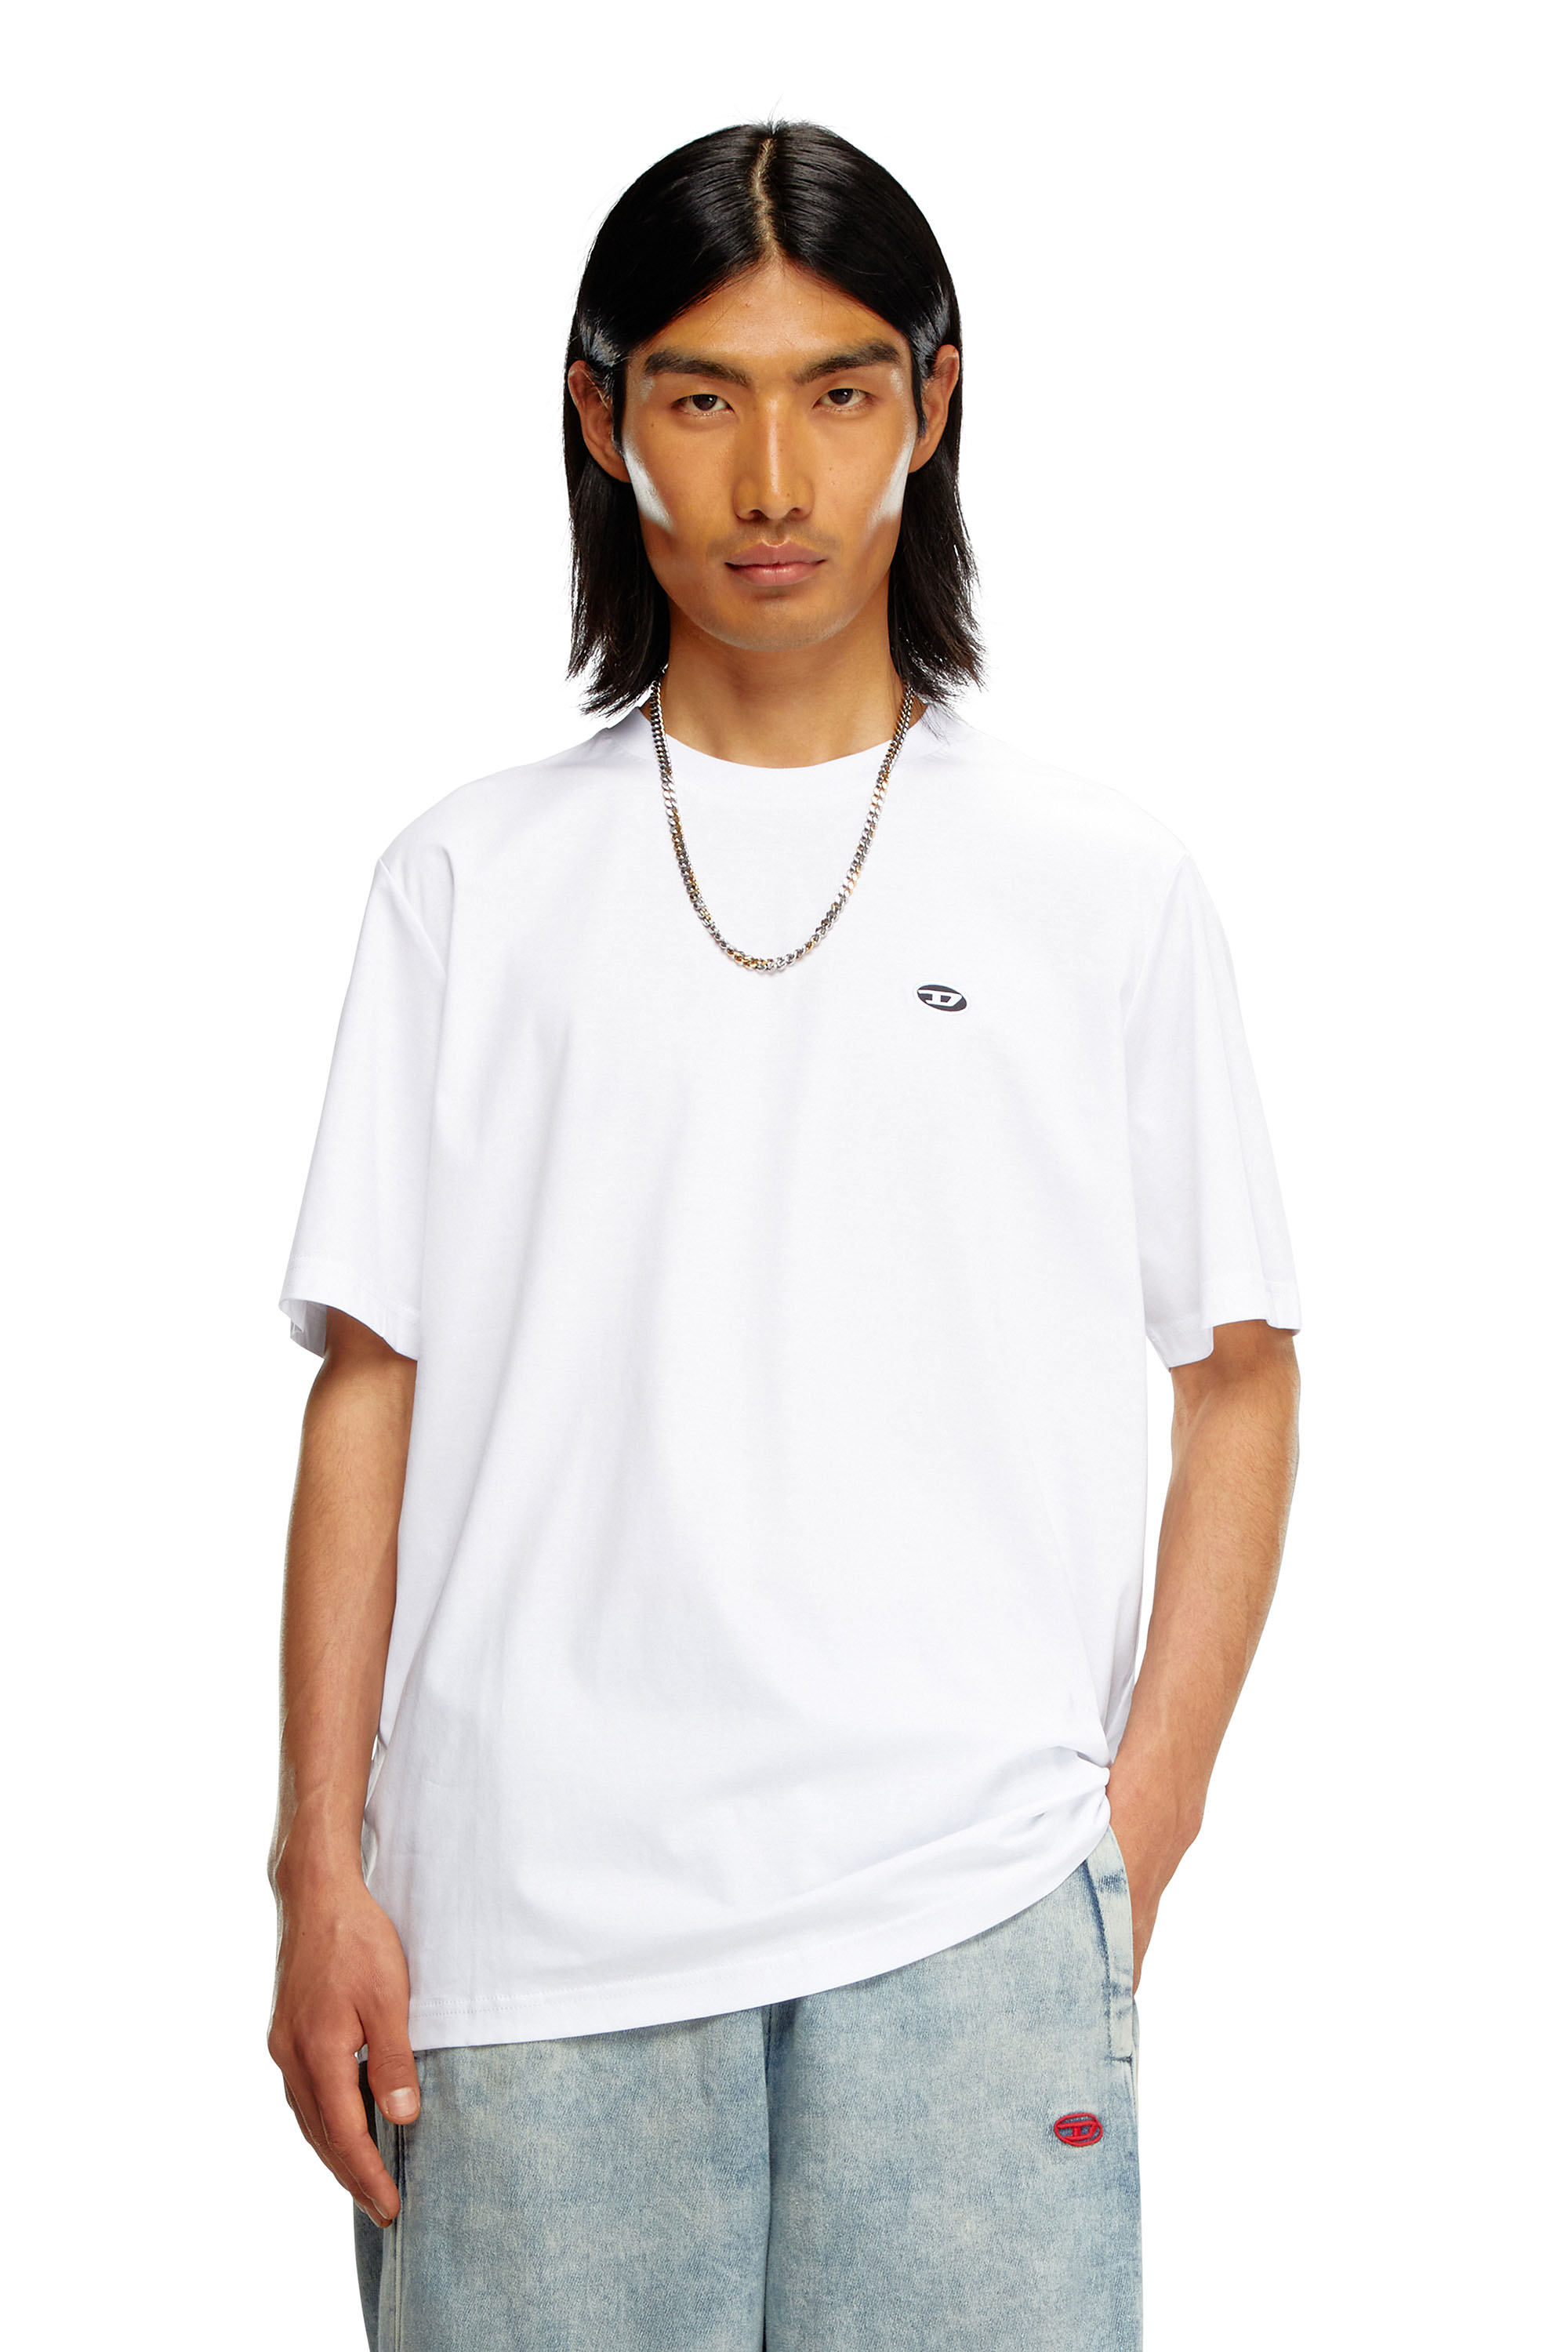 Diesel T-shirt With D Oval Patch In White